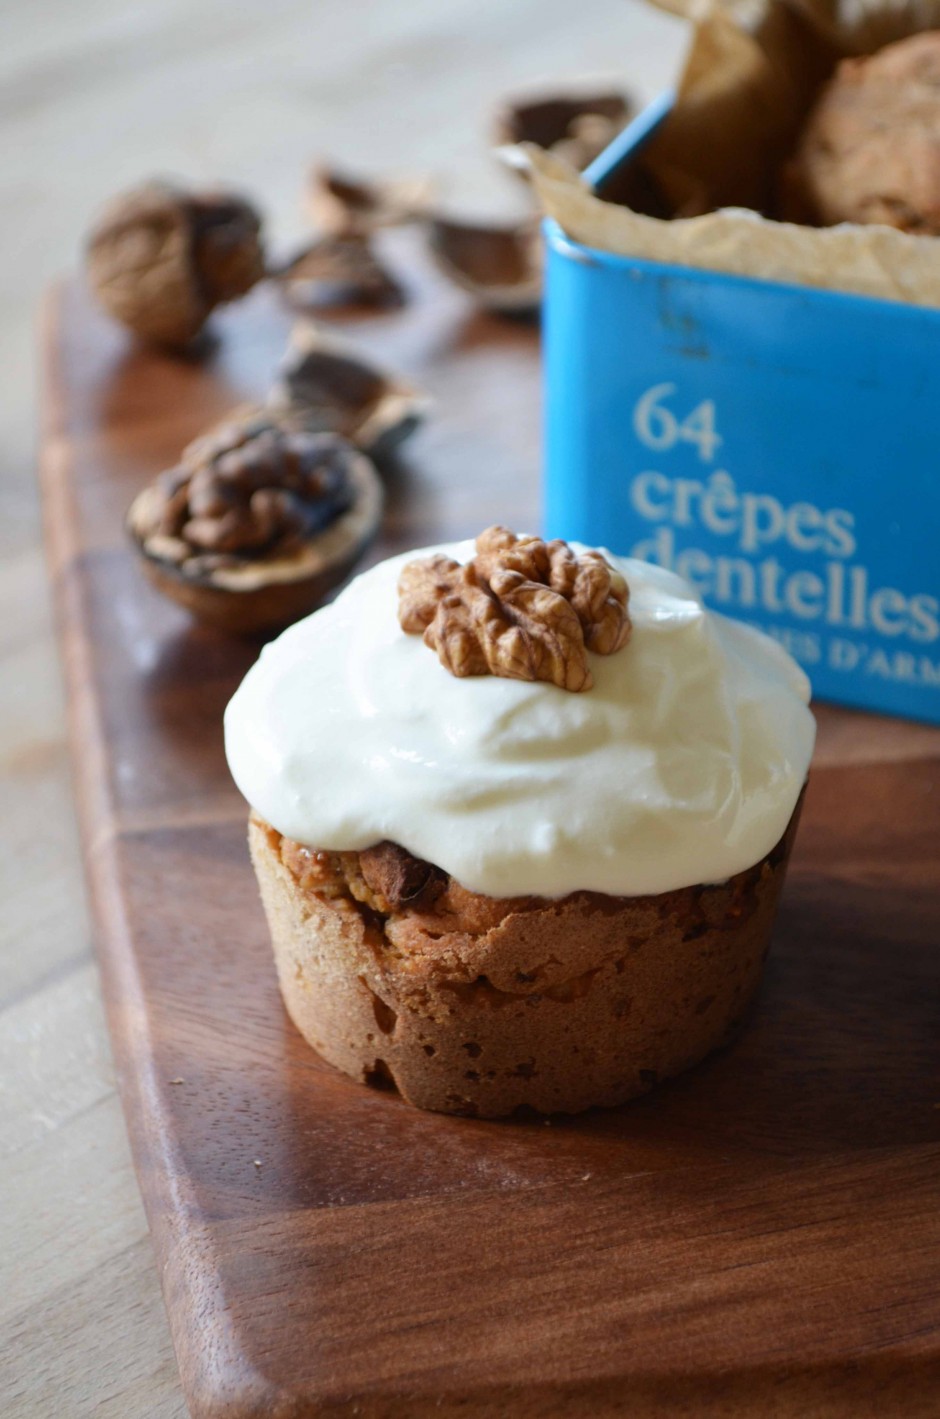 Apple Muffins with Walnuts, Cinnamon and Zante Currants. Photo and recipe by That Healthy Kitchen